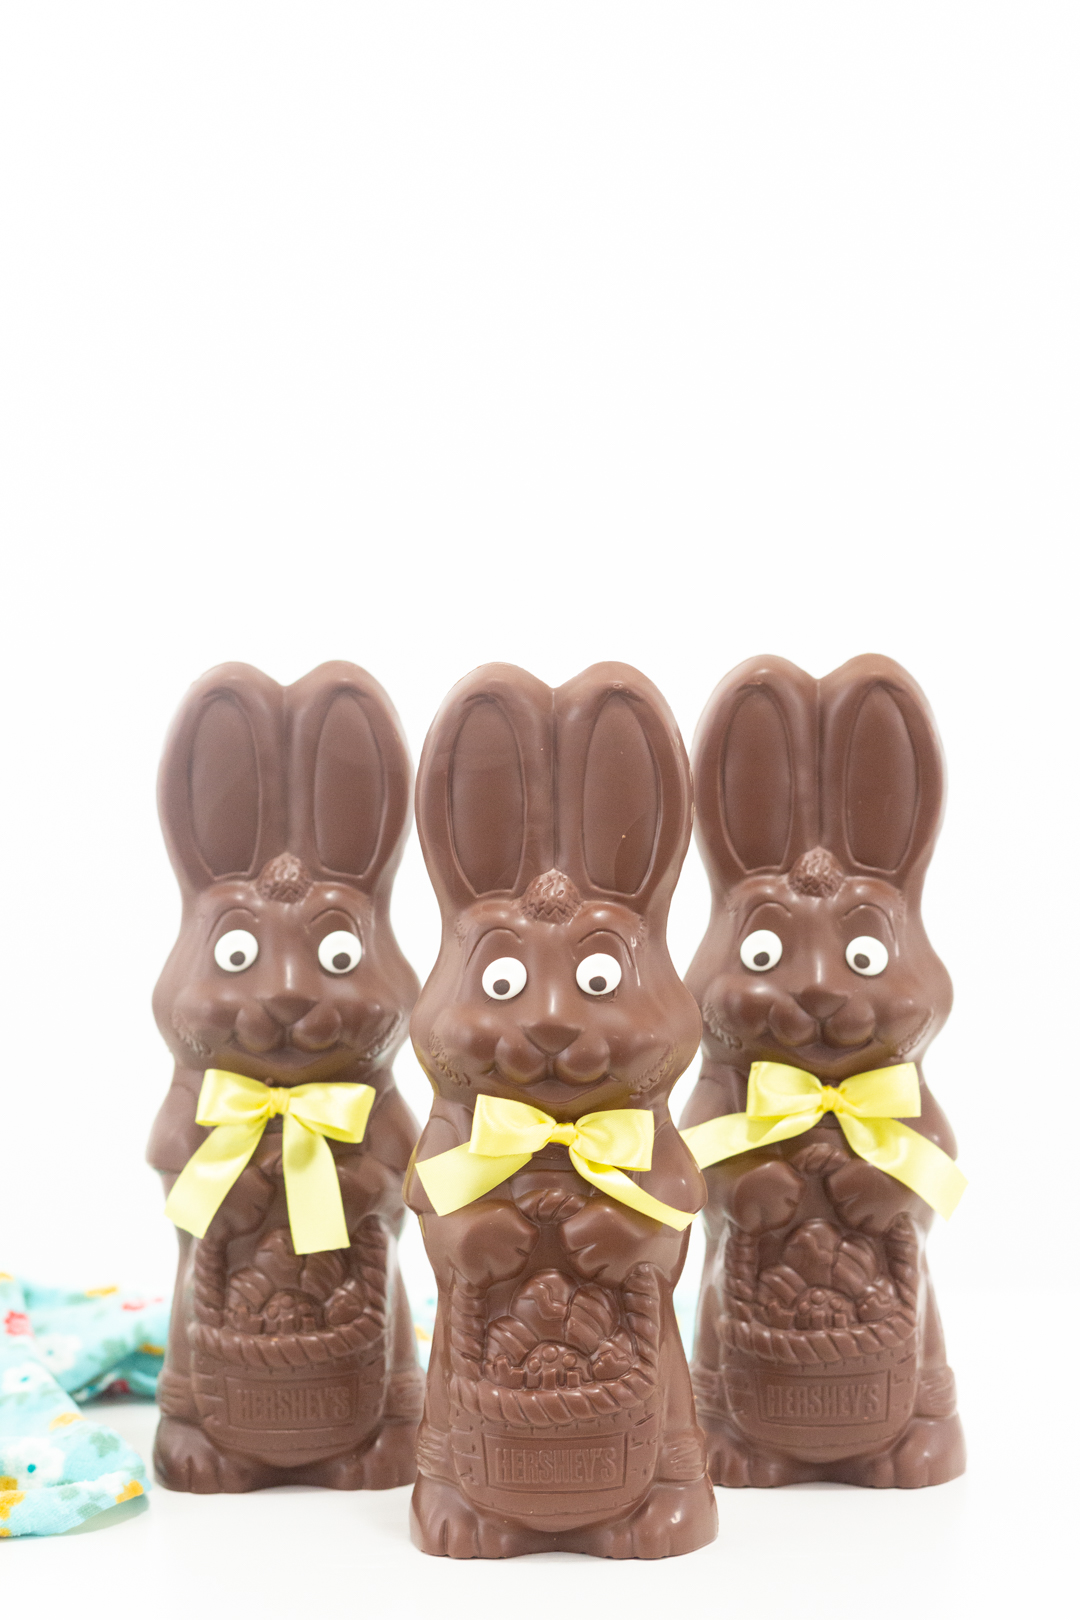 extra large 20 ounce hollow chocolate easter bunnies by hershey's brand